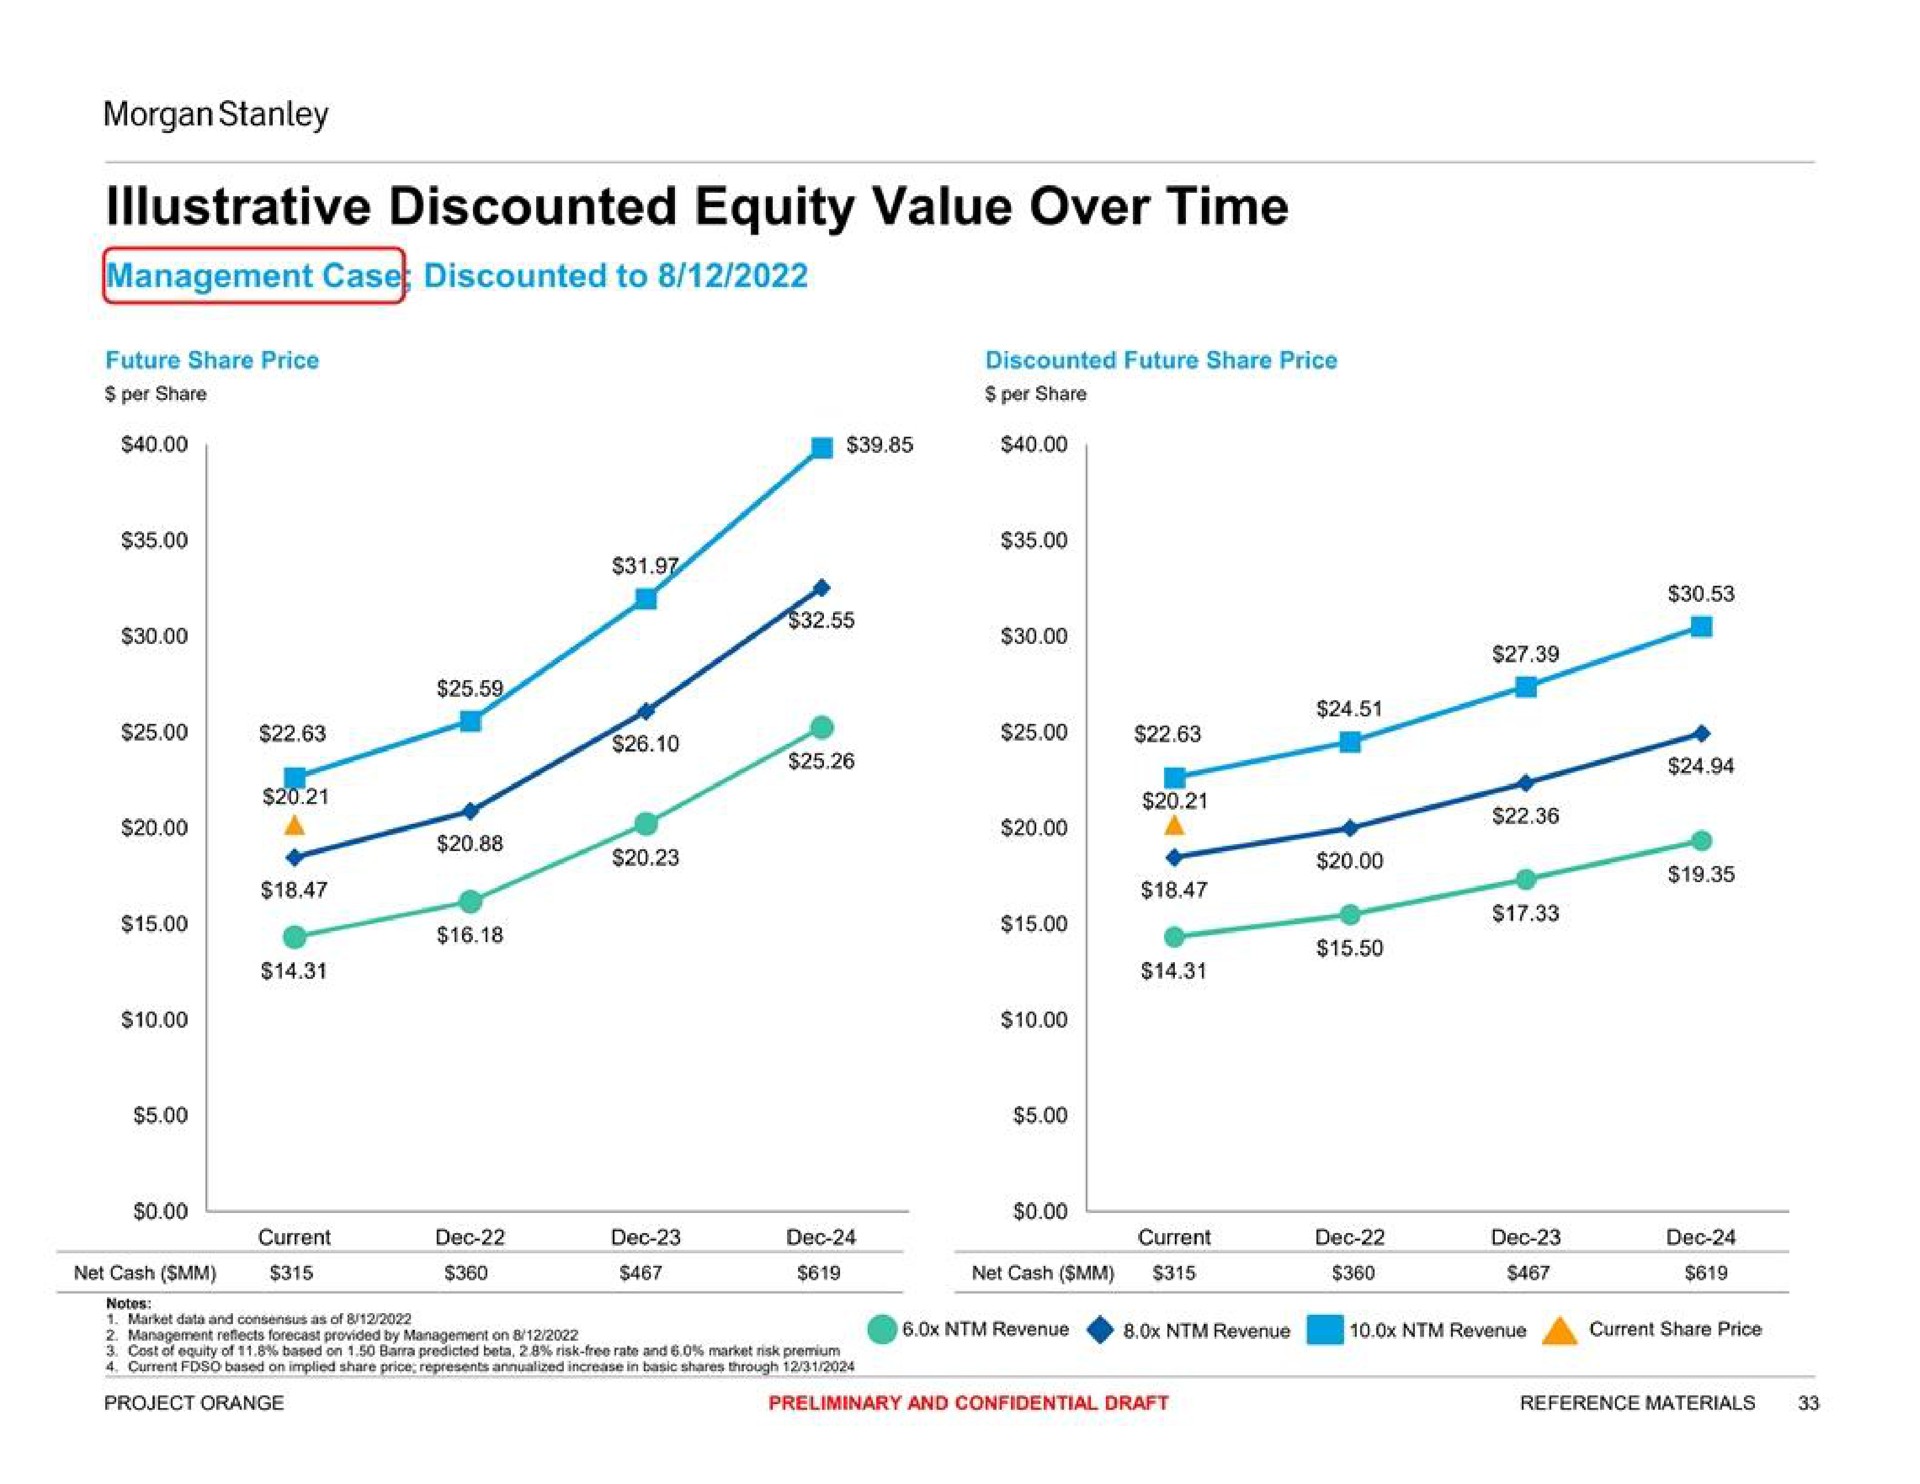 illustrative discounted equity value over time | Morgan Stanley